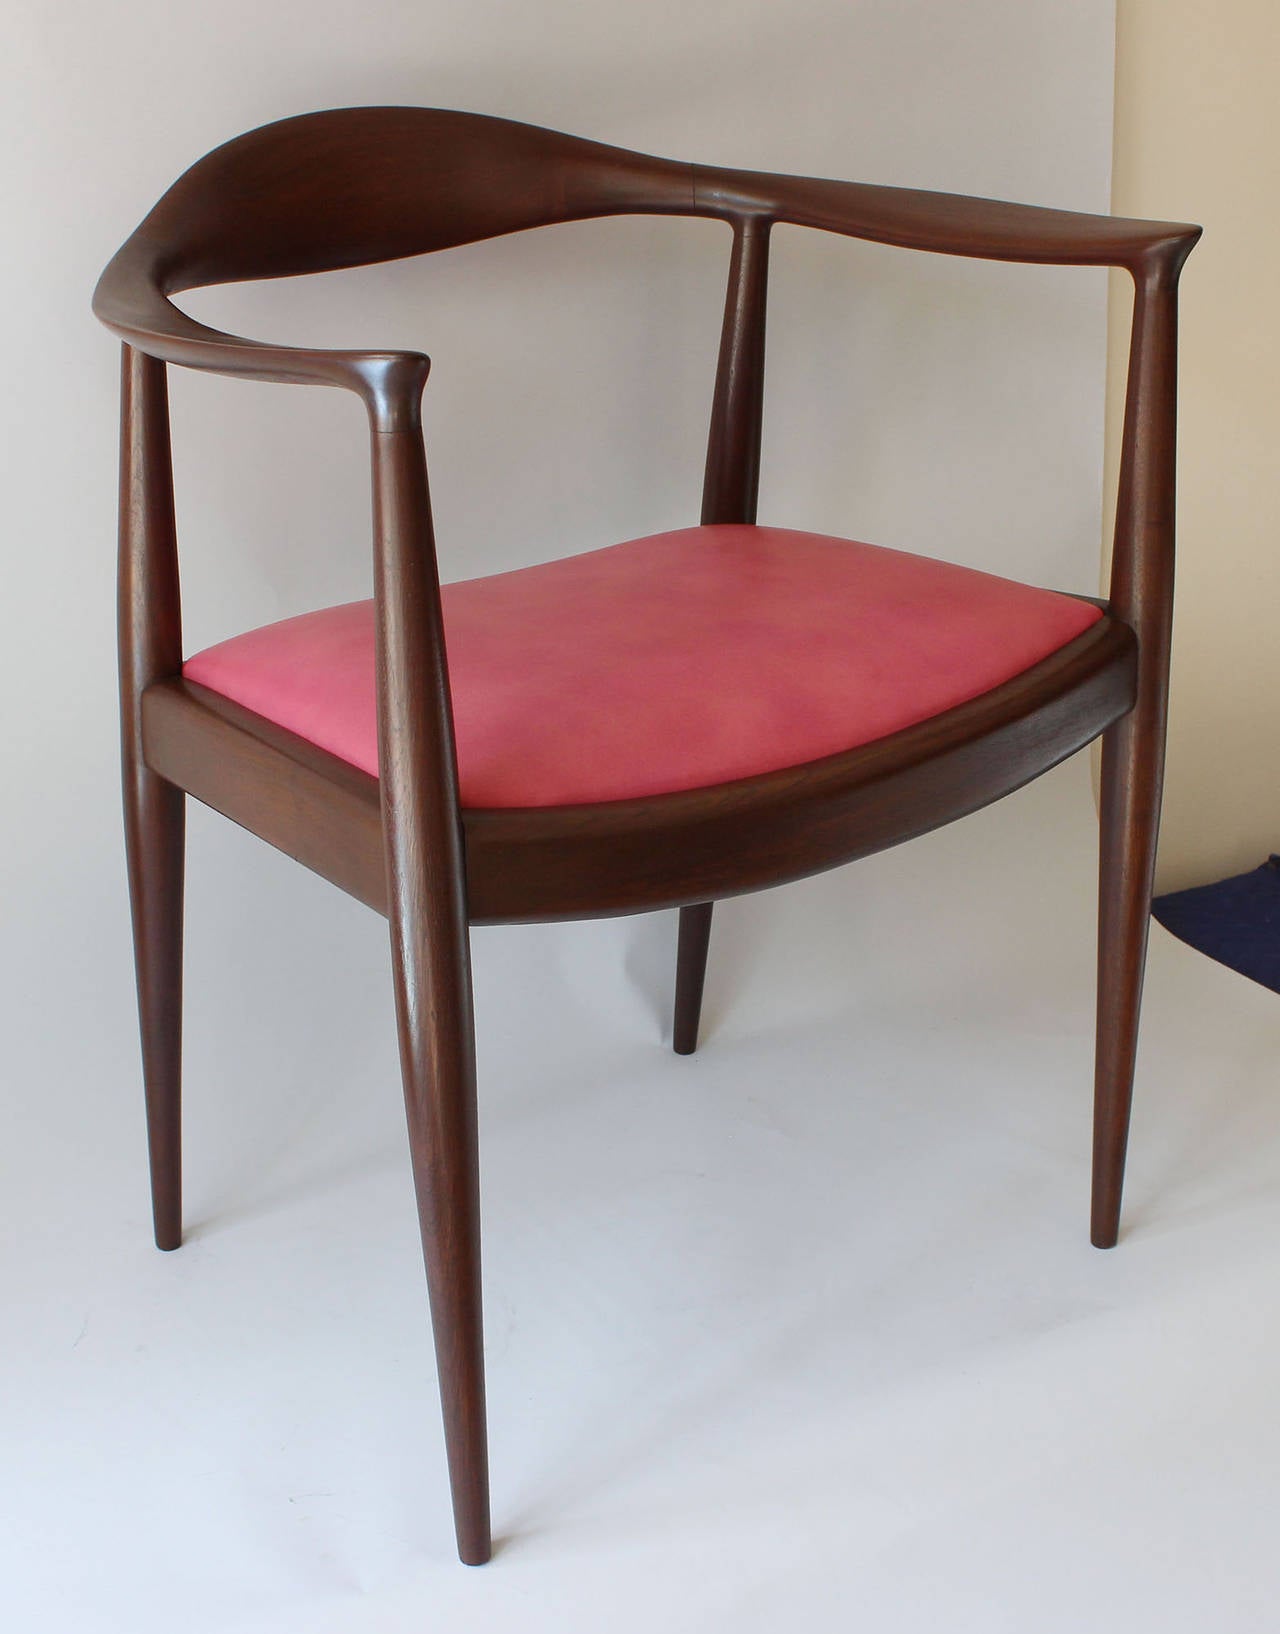 Classic teak armchair with red leather seat, designed in 1949 by Hans Wegner in collaboration with furniture maker Johannes Hansen.  It rose to prominence in the 1961 televised debate between Richard Nixon and John F. Kennedy. Both presidential